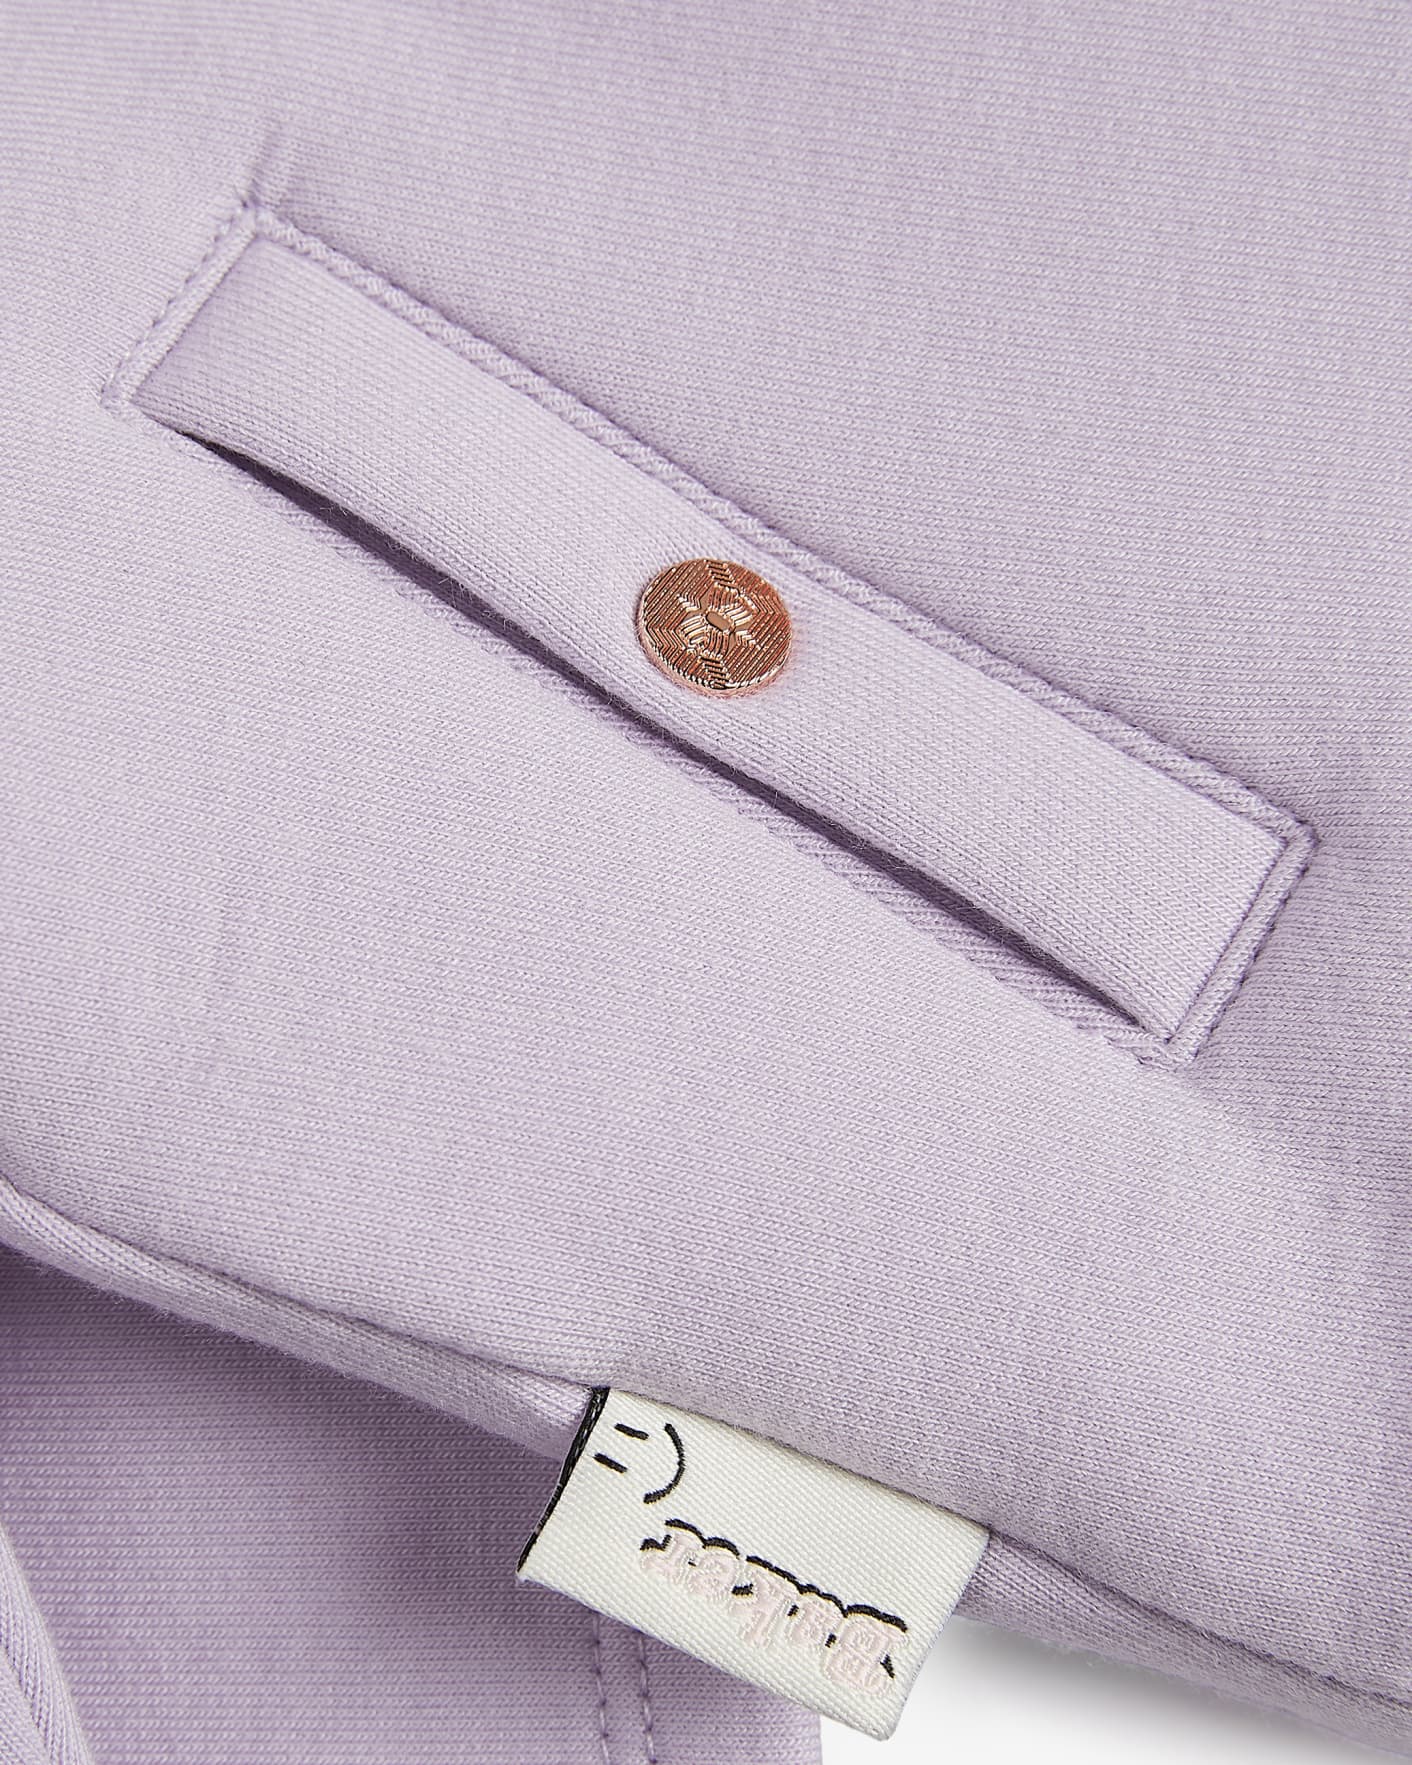 Lilac Frill Detail Hooded Jacket Ted Baker